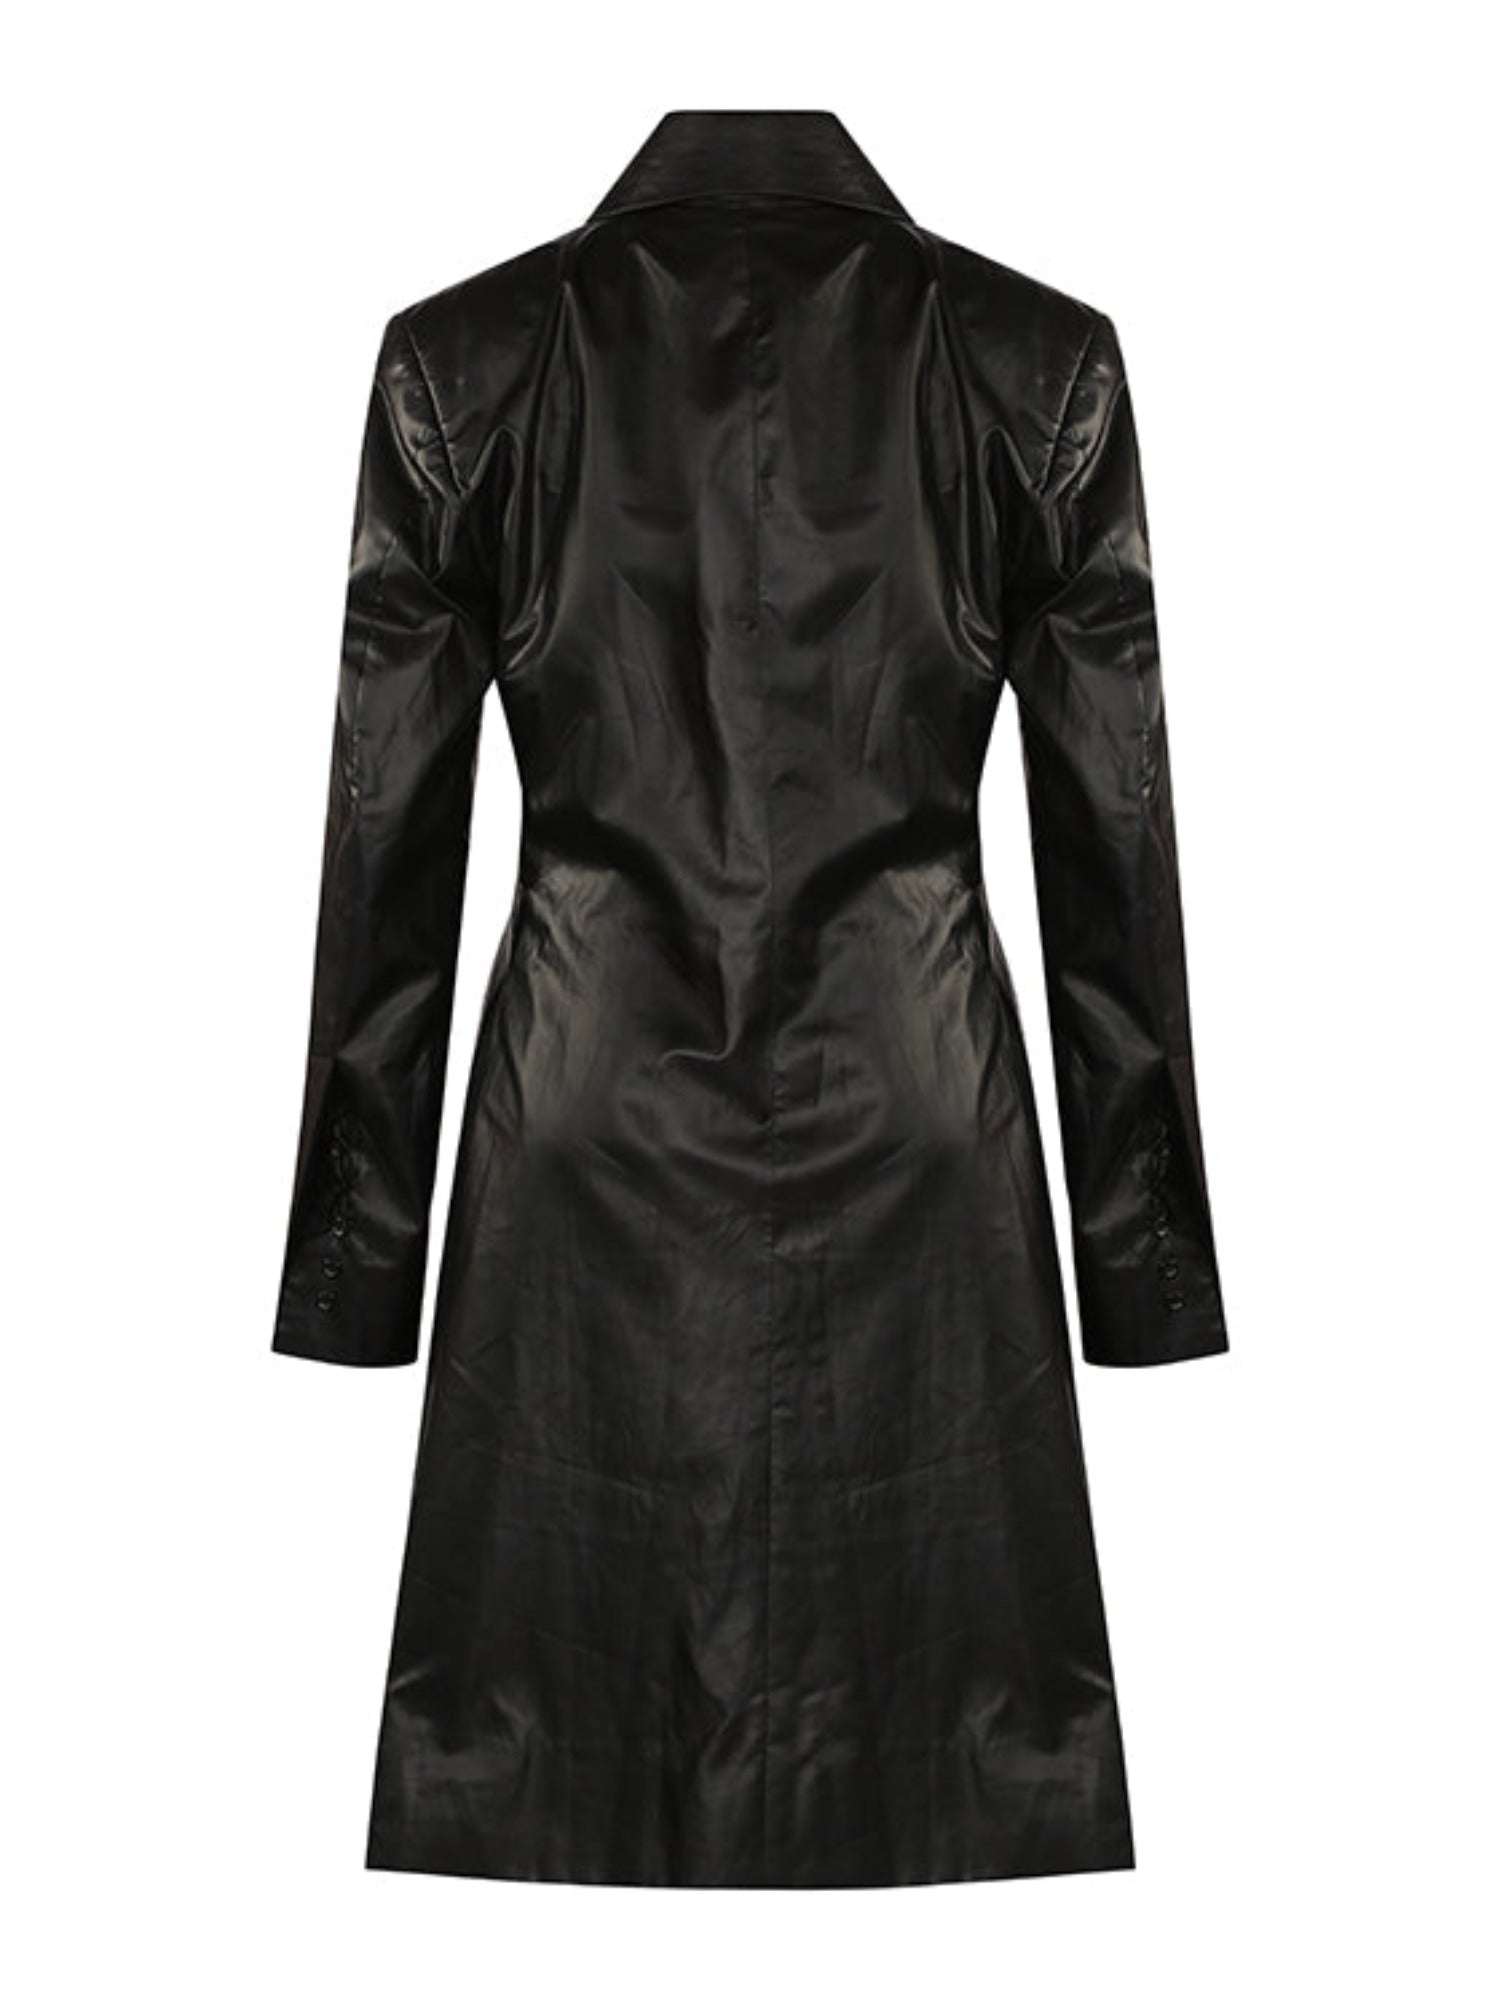 Mens Belted Black Leather Double Breasted Trench Coat